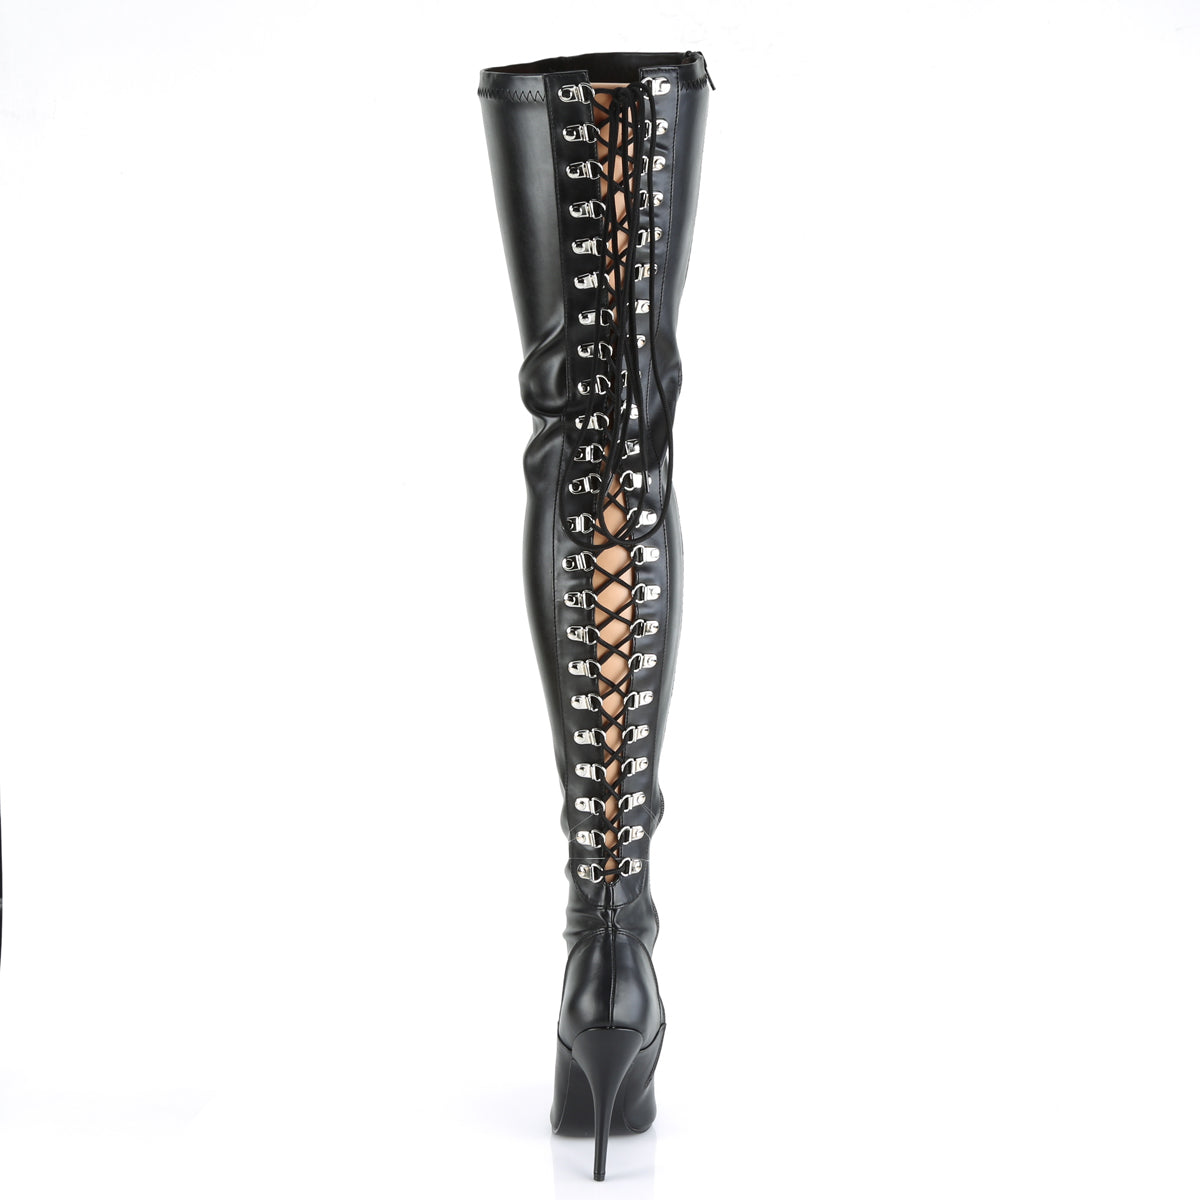 SEDUCE-3063 Pleaser Thigh Boots 5" Heel Black Fetish Shoes-Pleaser- Sexy Shoes Fetish Footwear